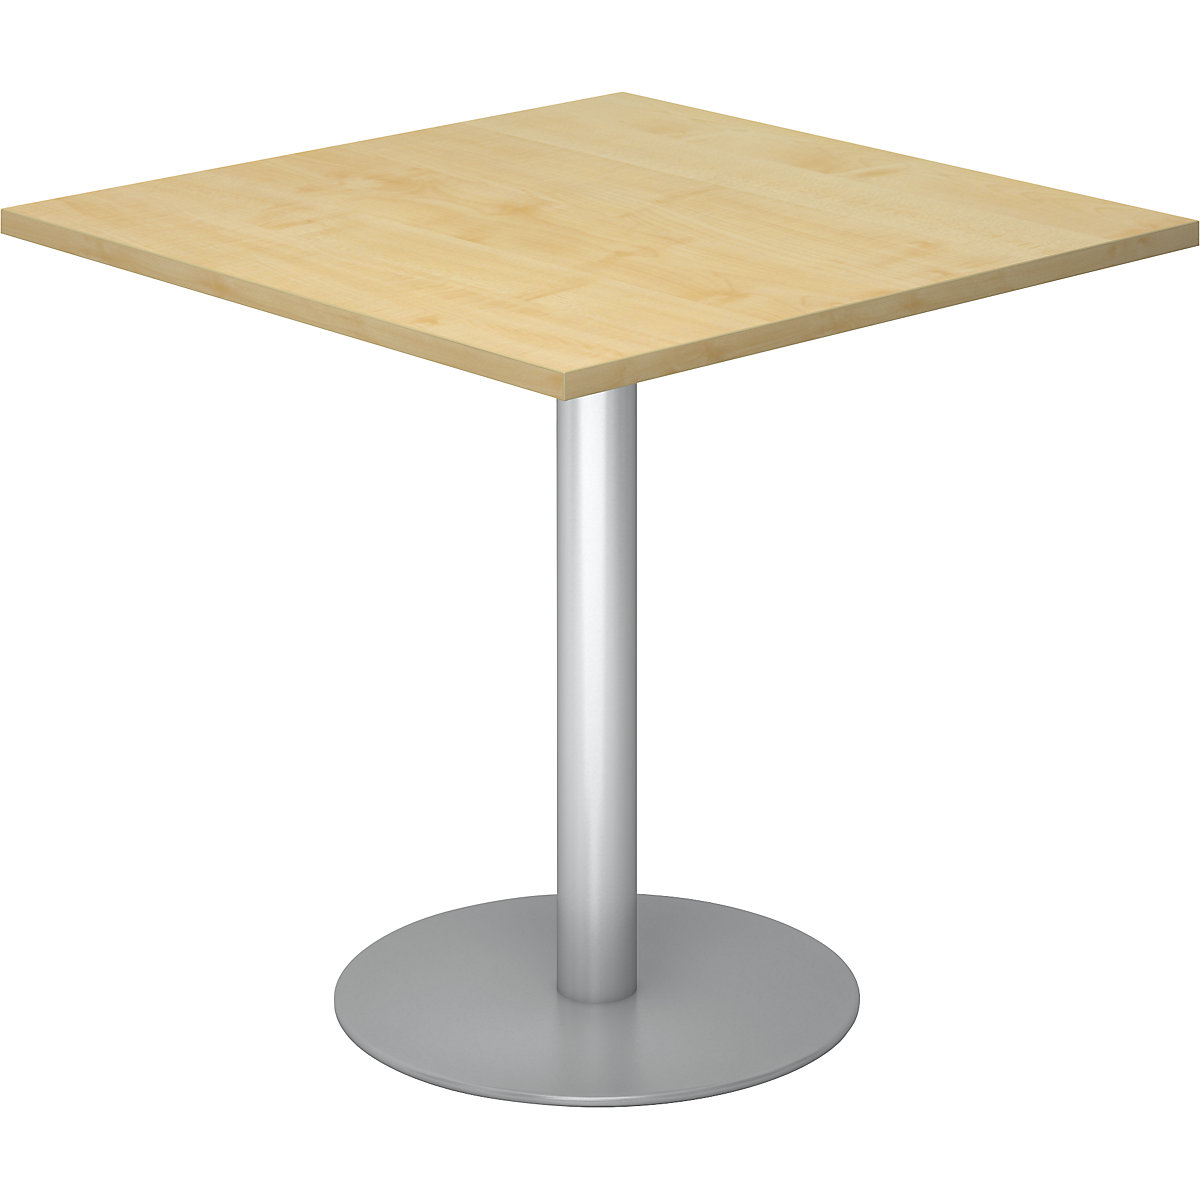 Conference table, LxW 800 x 800 mm